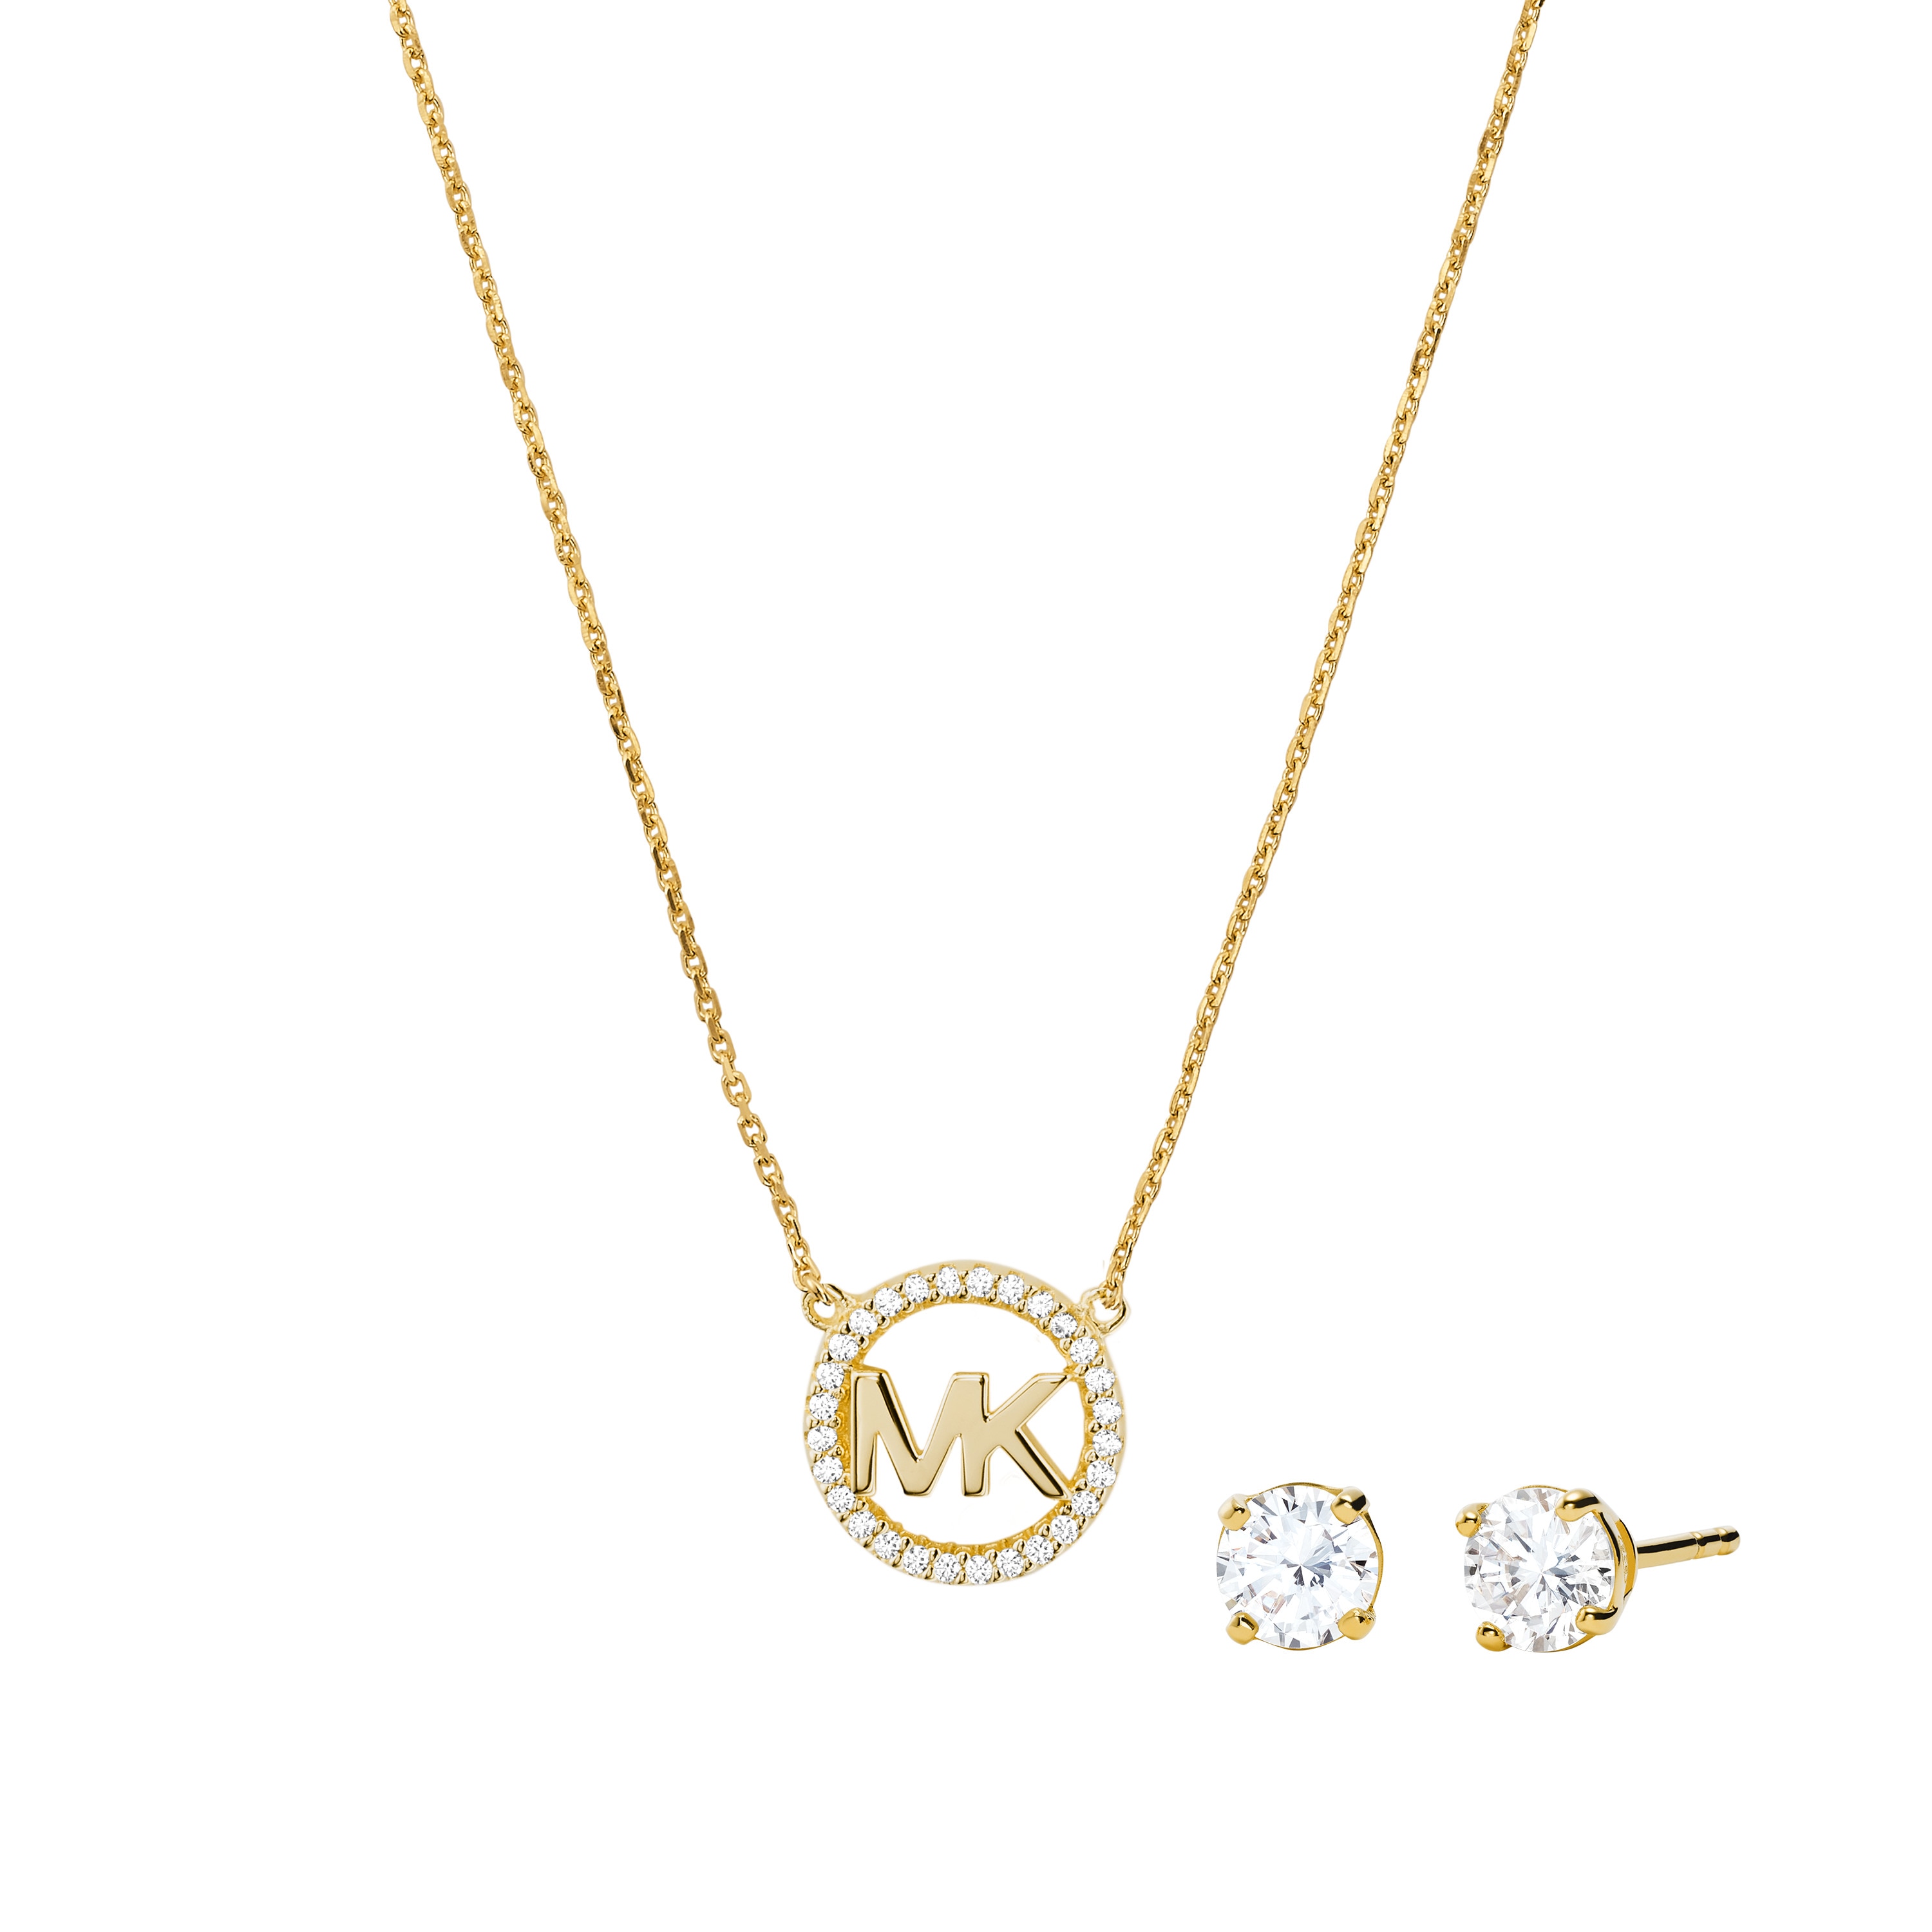 Premium necklace and earrings gold